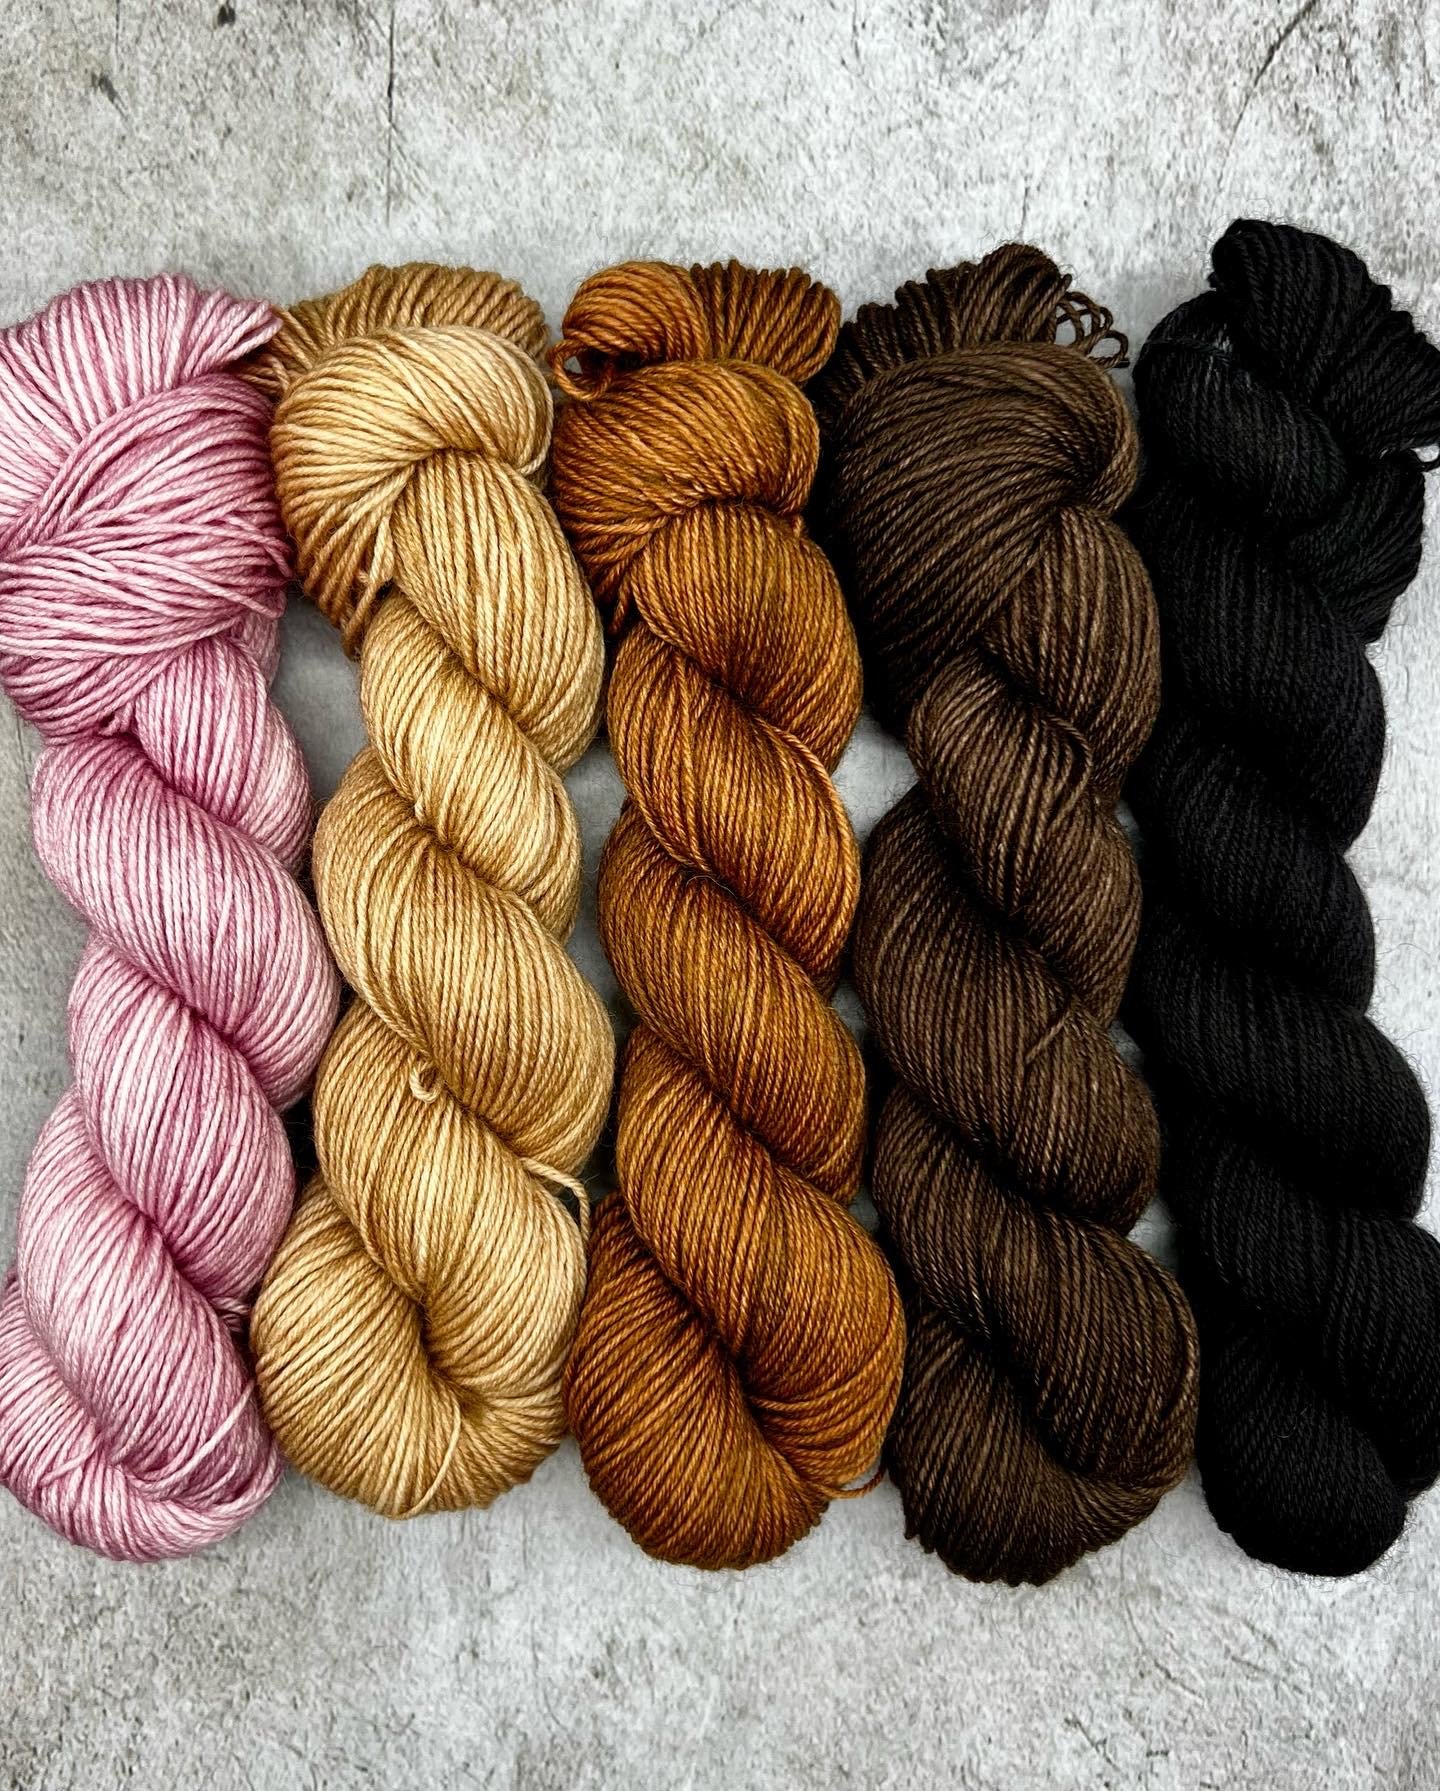 Cashmere Yarn For Knitting, Crochet & Weaving Tagged dream in